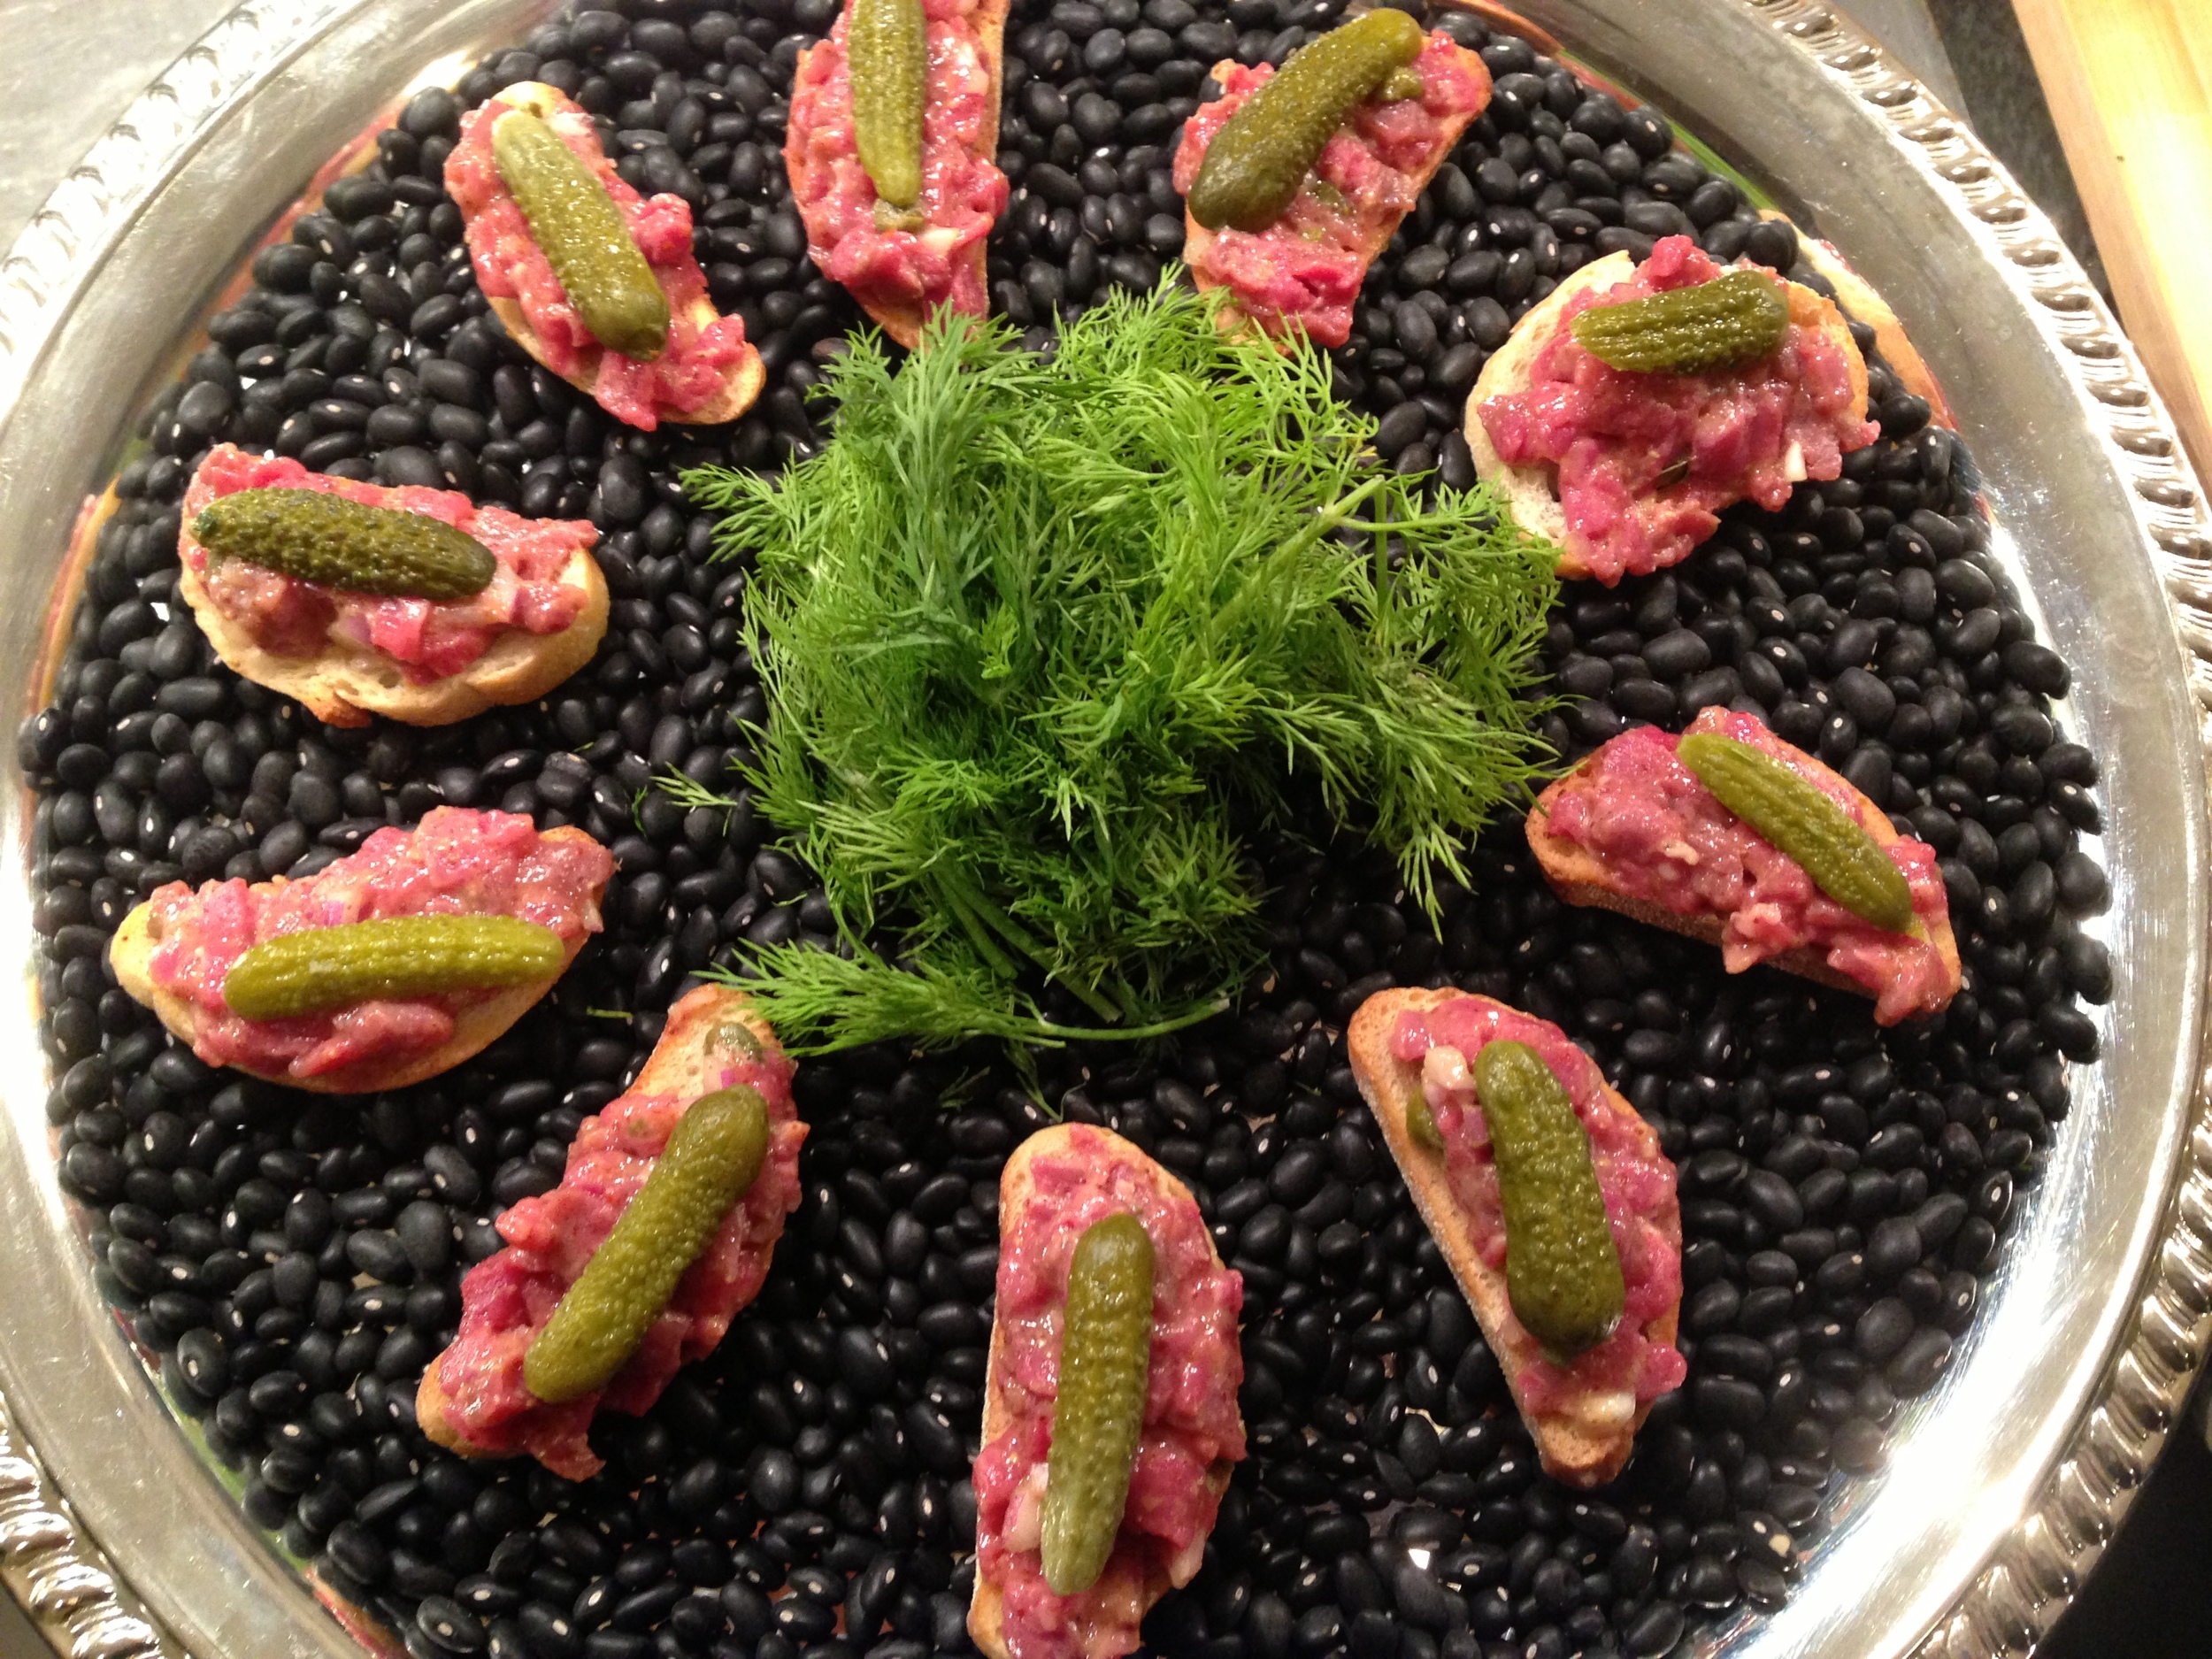 Hand-cut beef tartare on crostini with gherkins